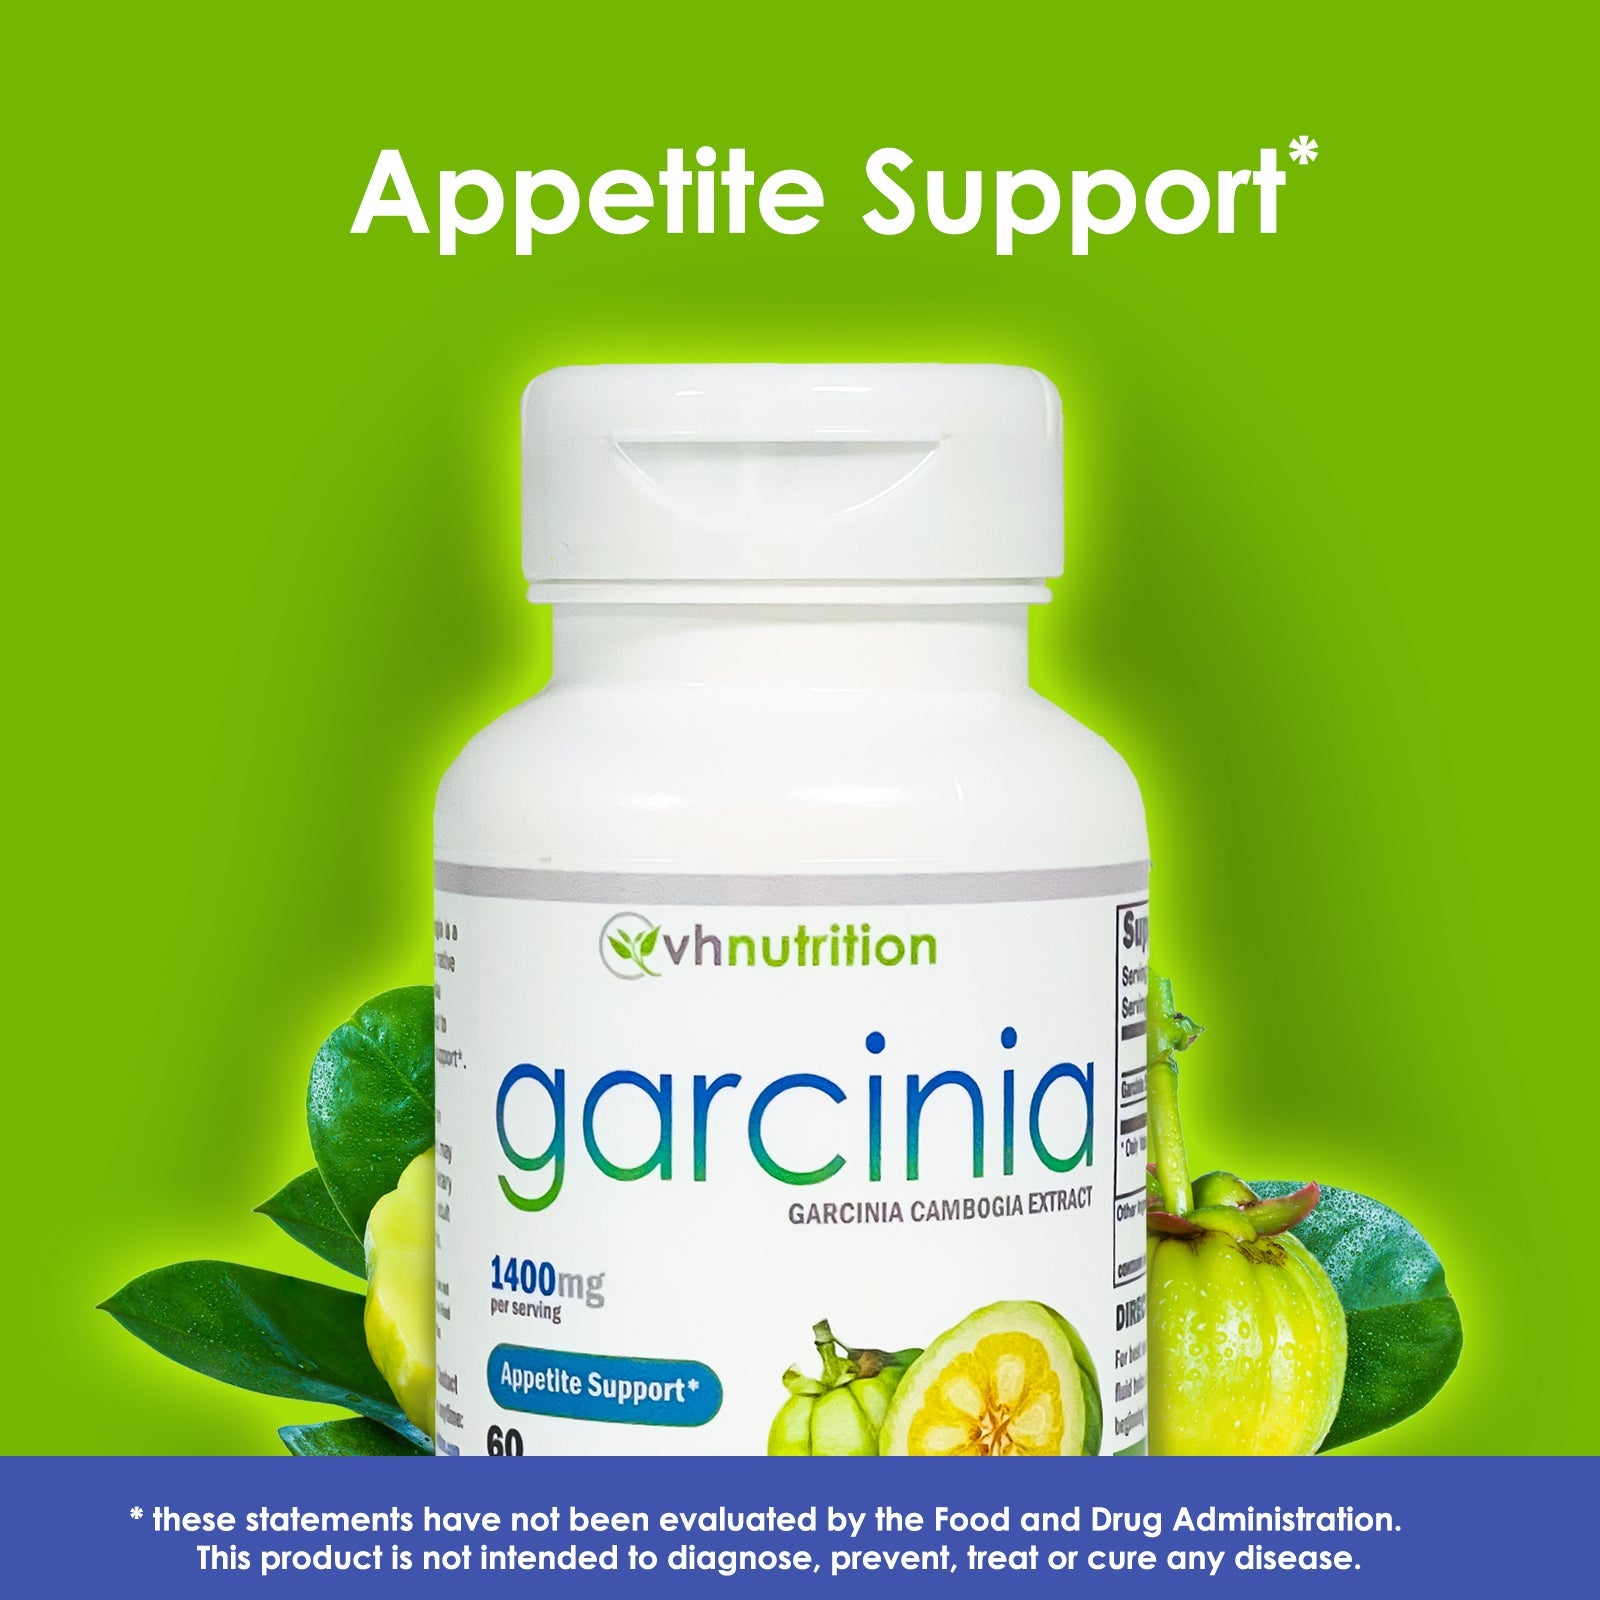 VH Nutrition GARCINIA CAMBOGIA | Appetite Suppressant* and Control* Supplement | 1400mg Proprietary Formula | 60 Capsules